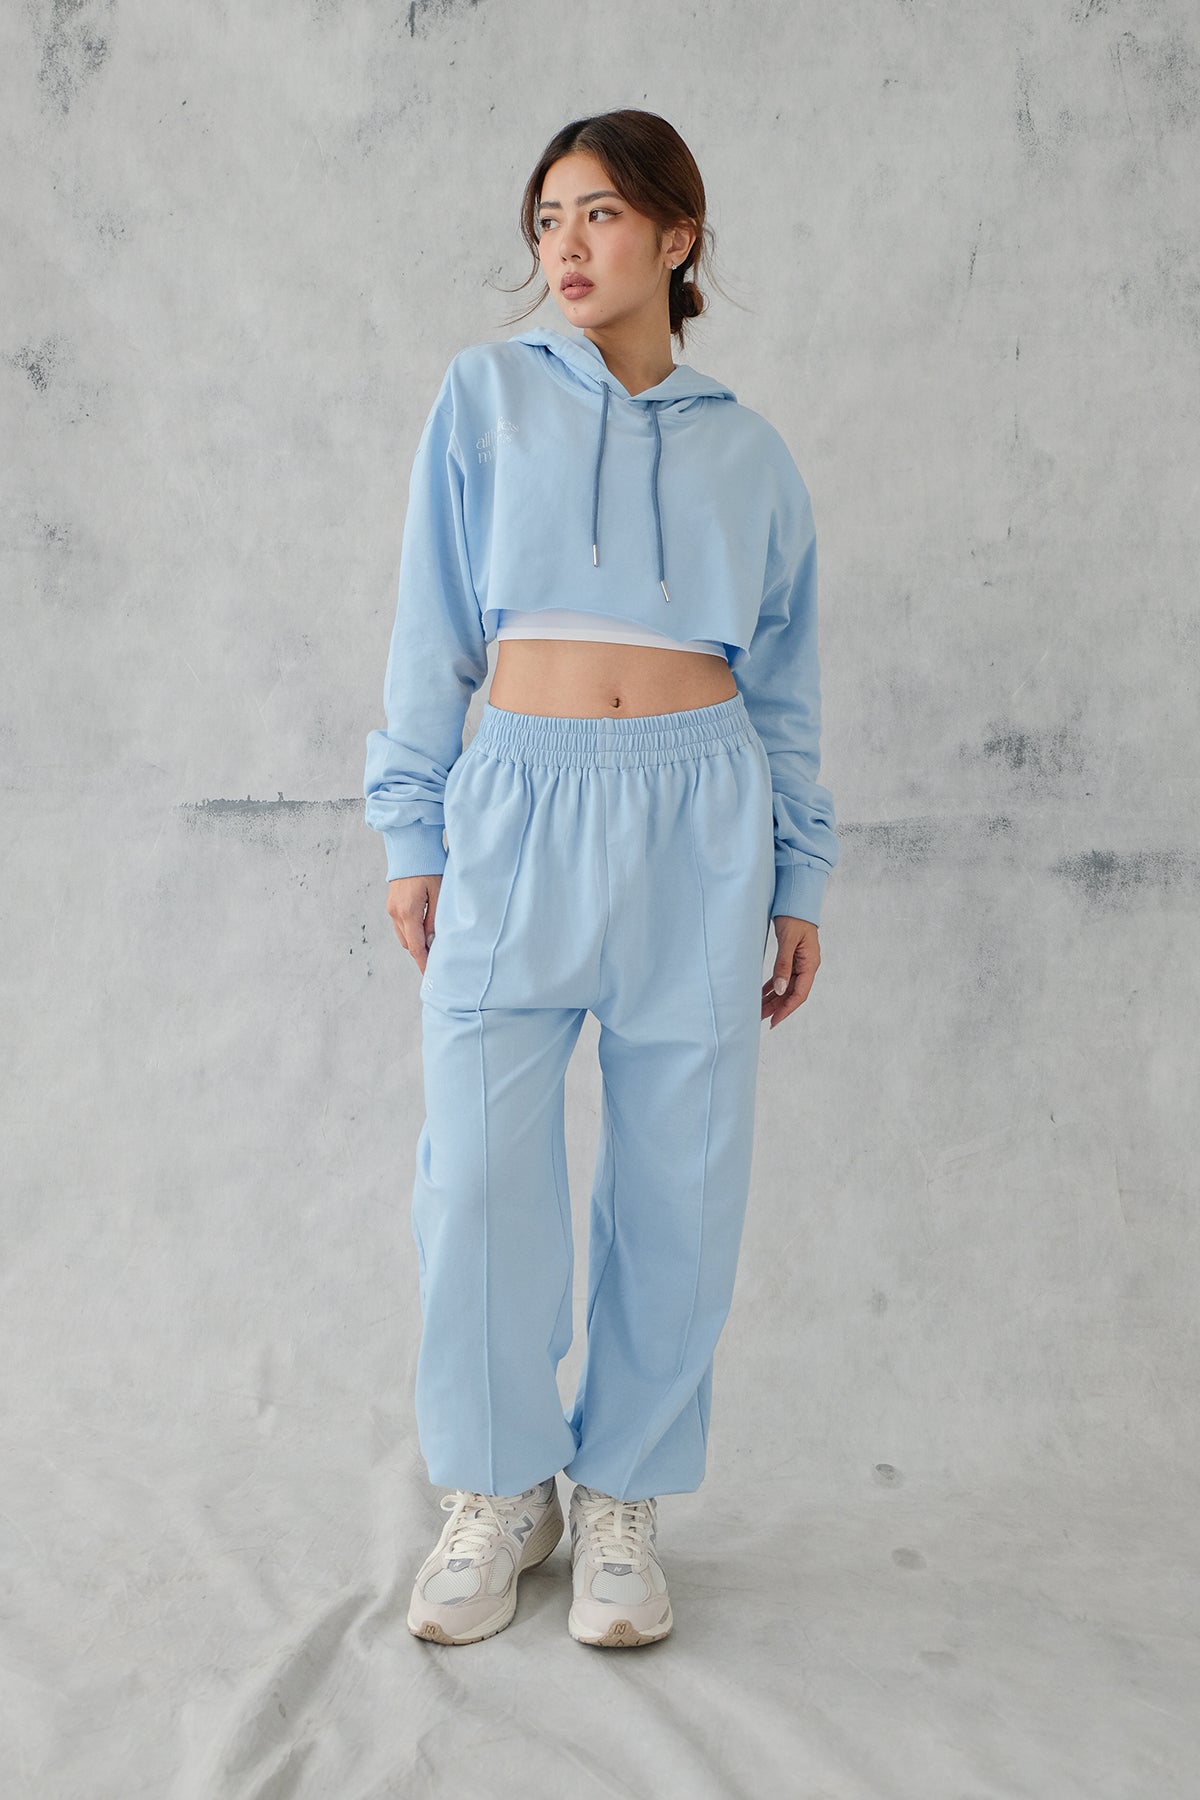 All Bodies Matter Jogger In Baby Blue (4 LEFT)